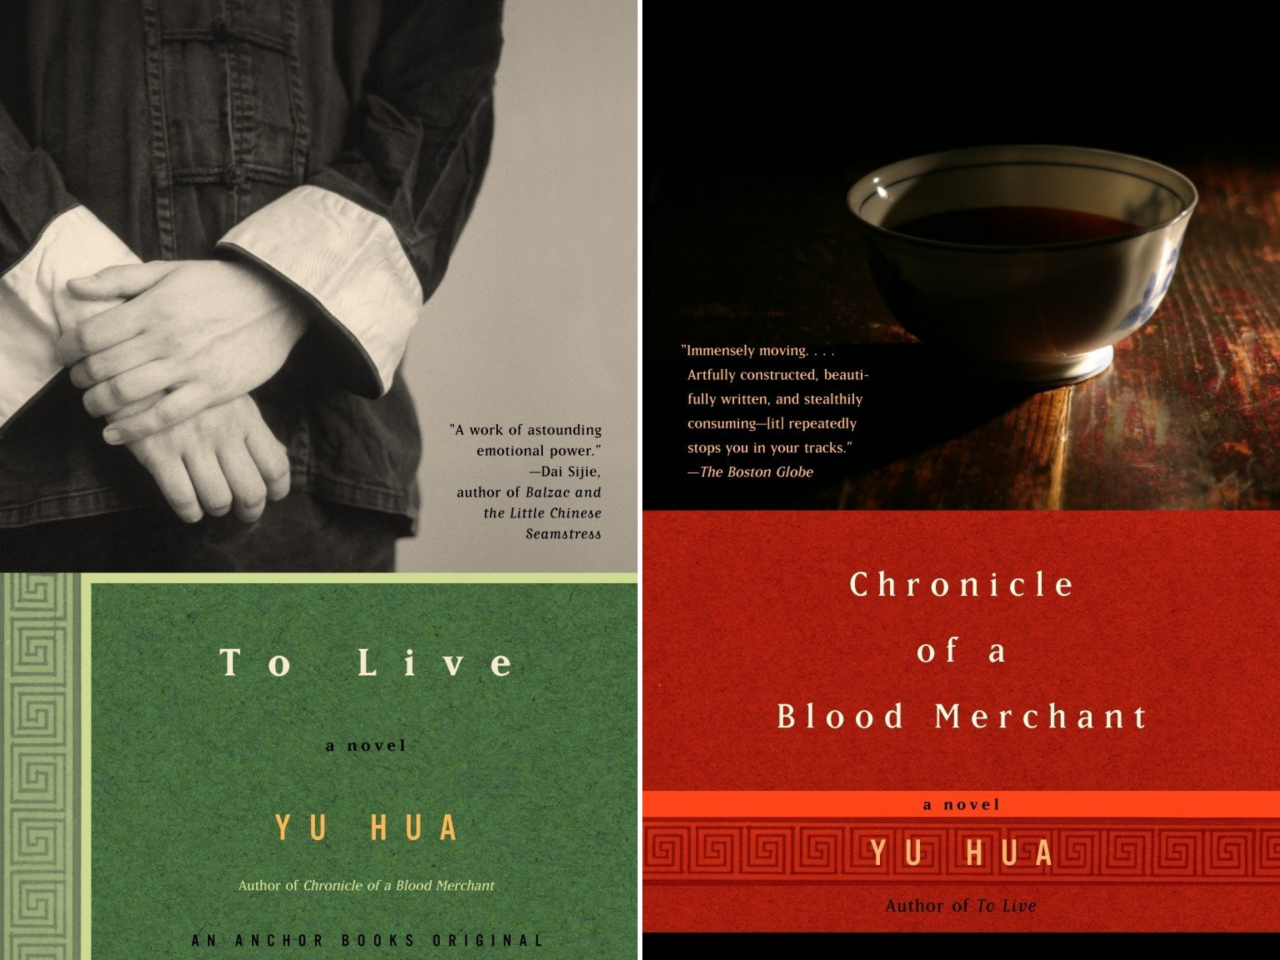 The English editions of "To Live" (left) and "Chronicle of a Blood Merchant" by Yu Hua (Anchor)